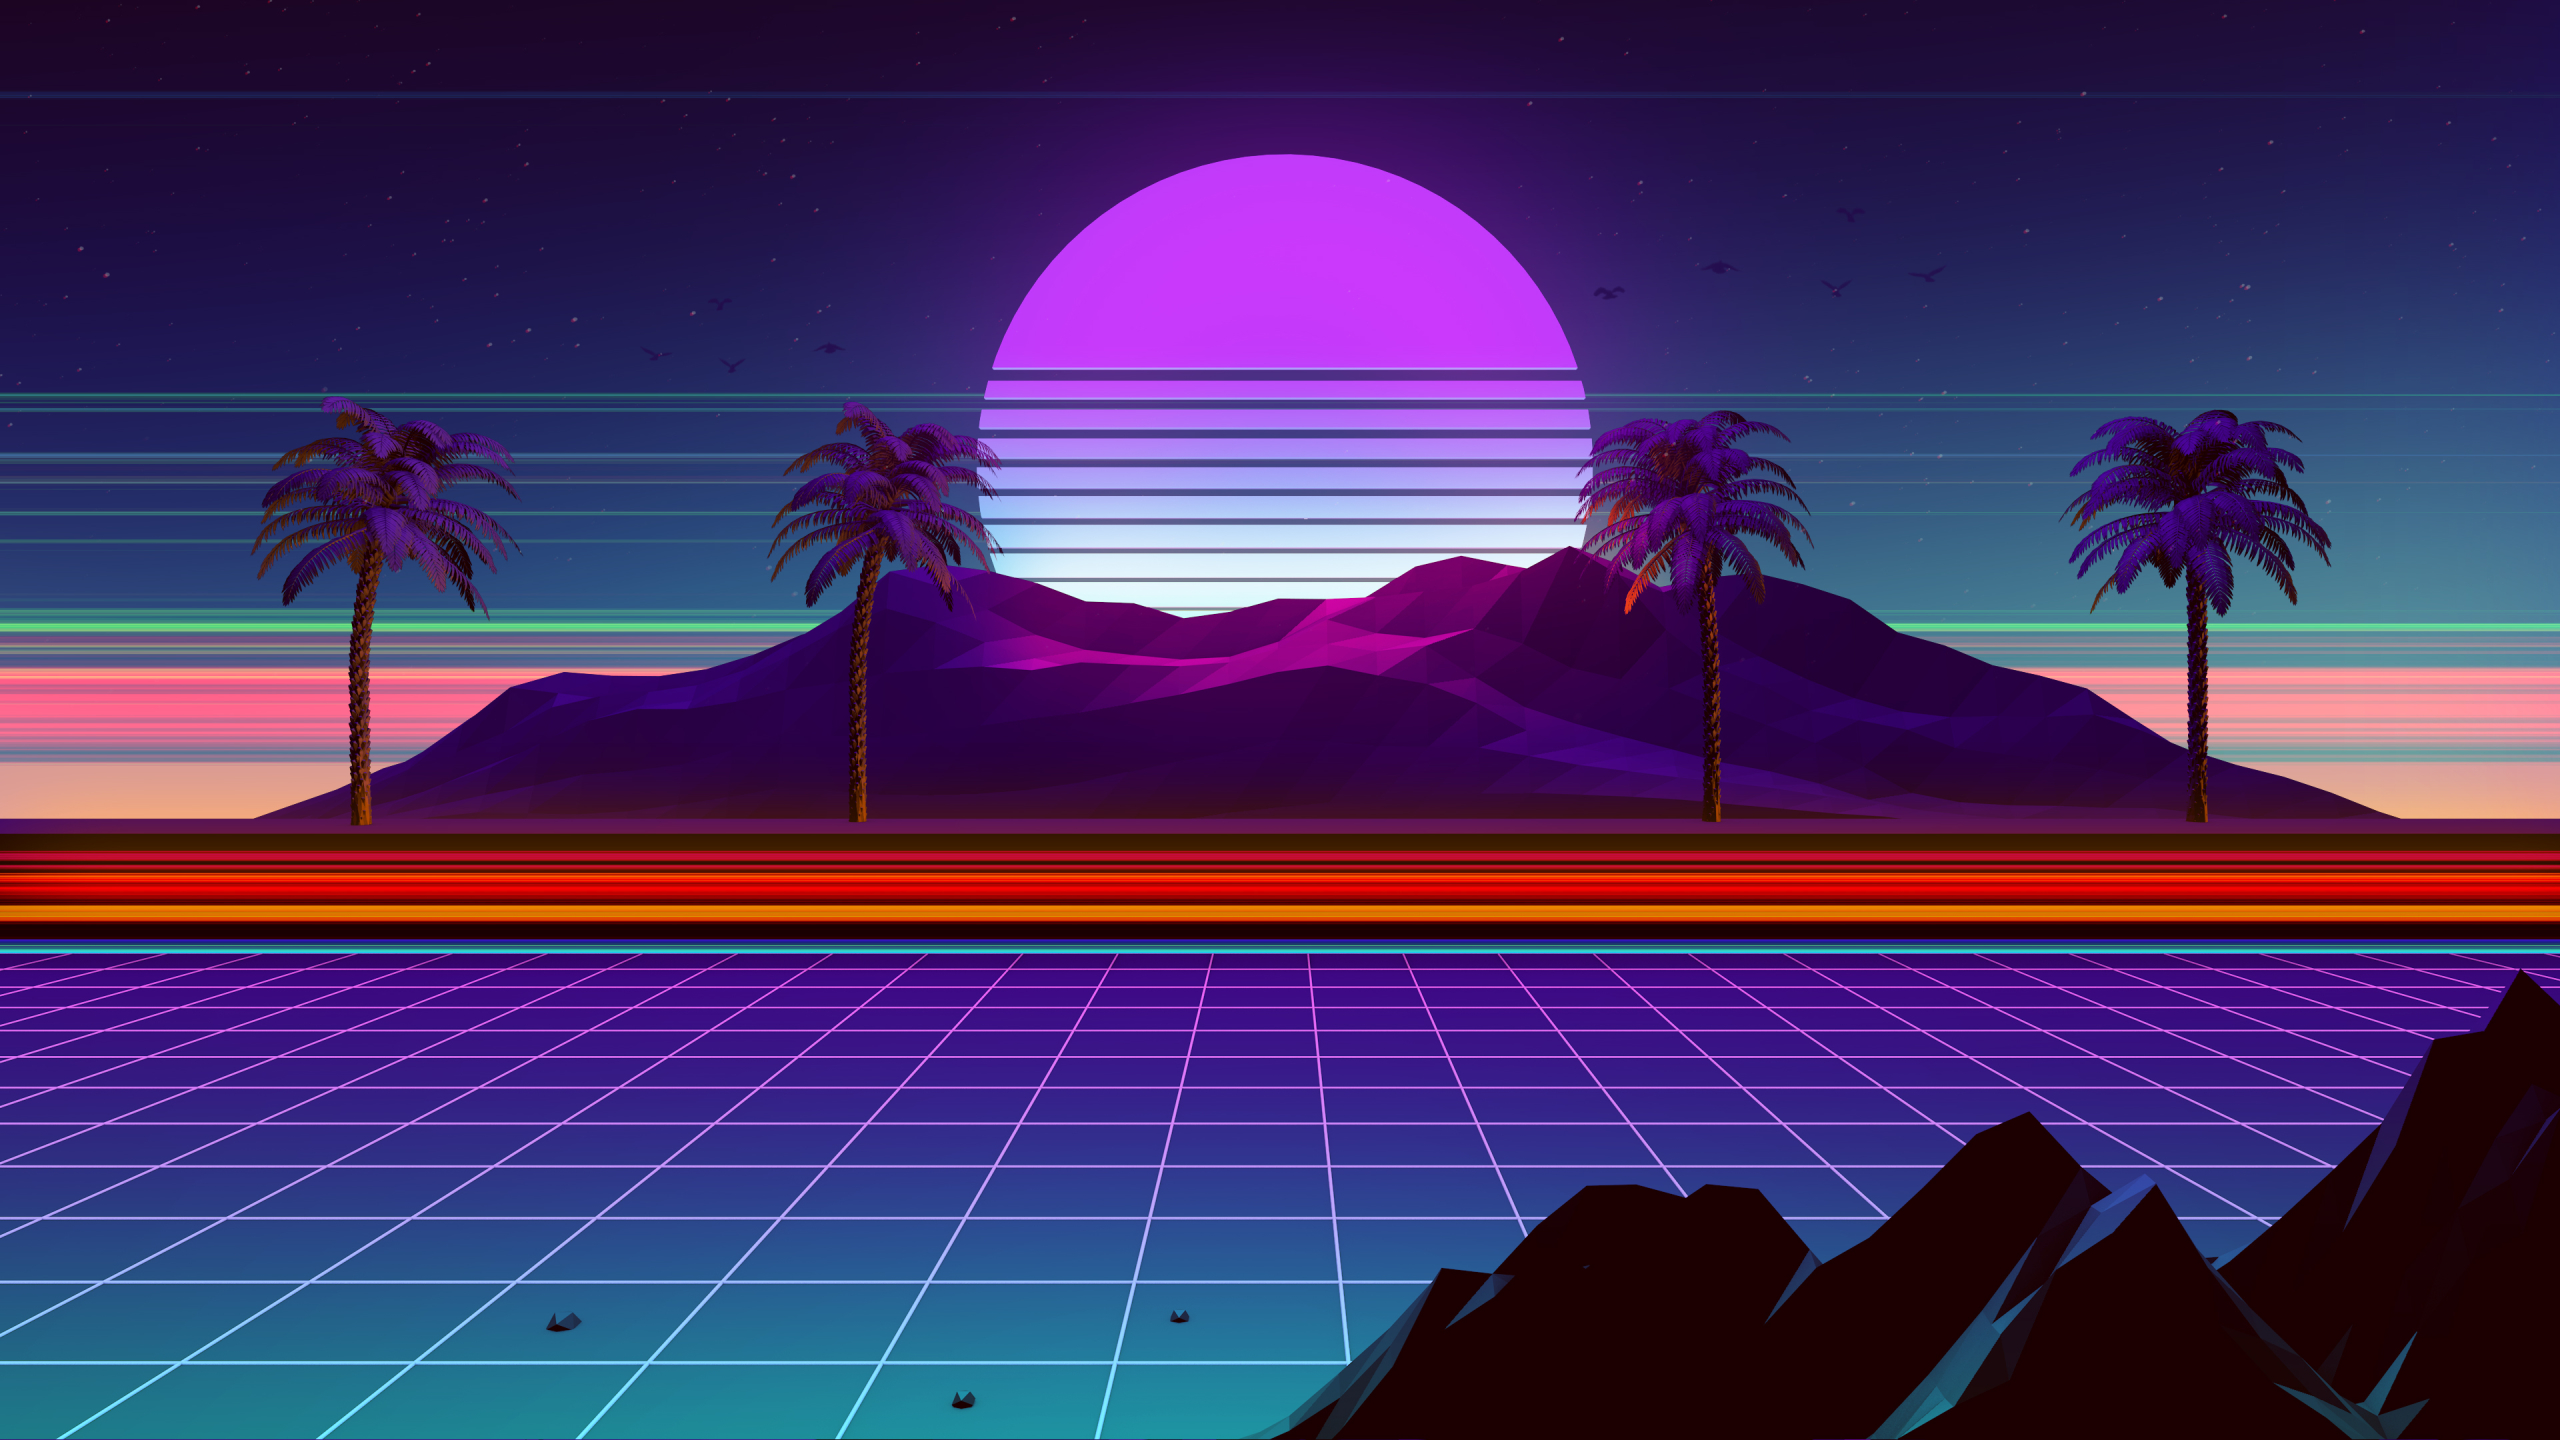 Synthwave And Retrowave 1440P Resolution Wallpaper, HD Artist 4K Wallpaper, Image, Photo and Background